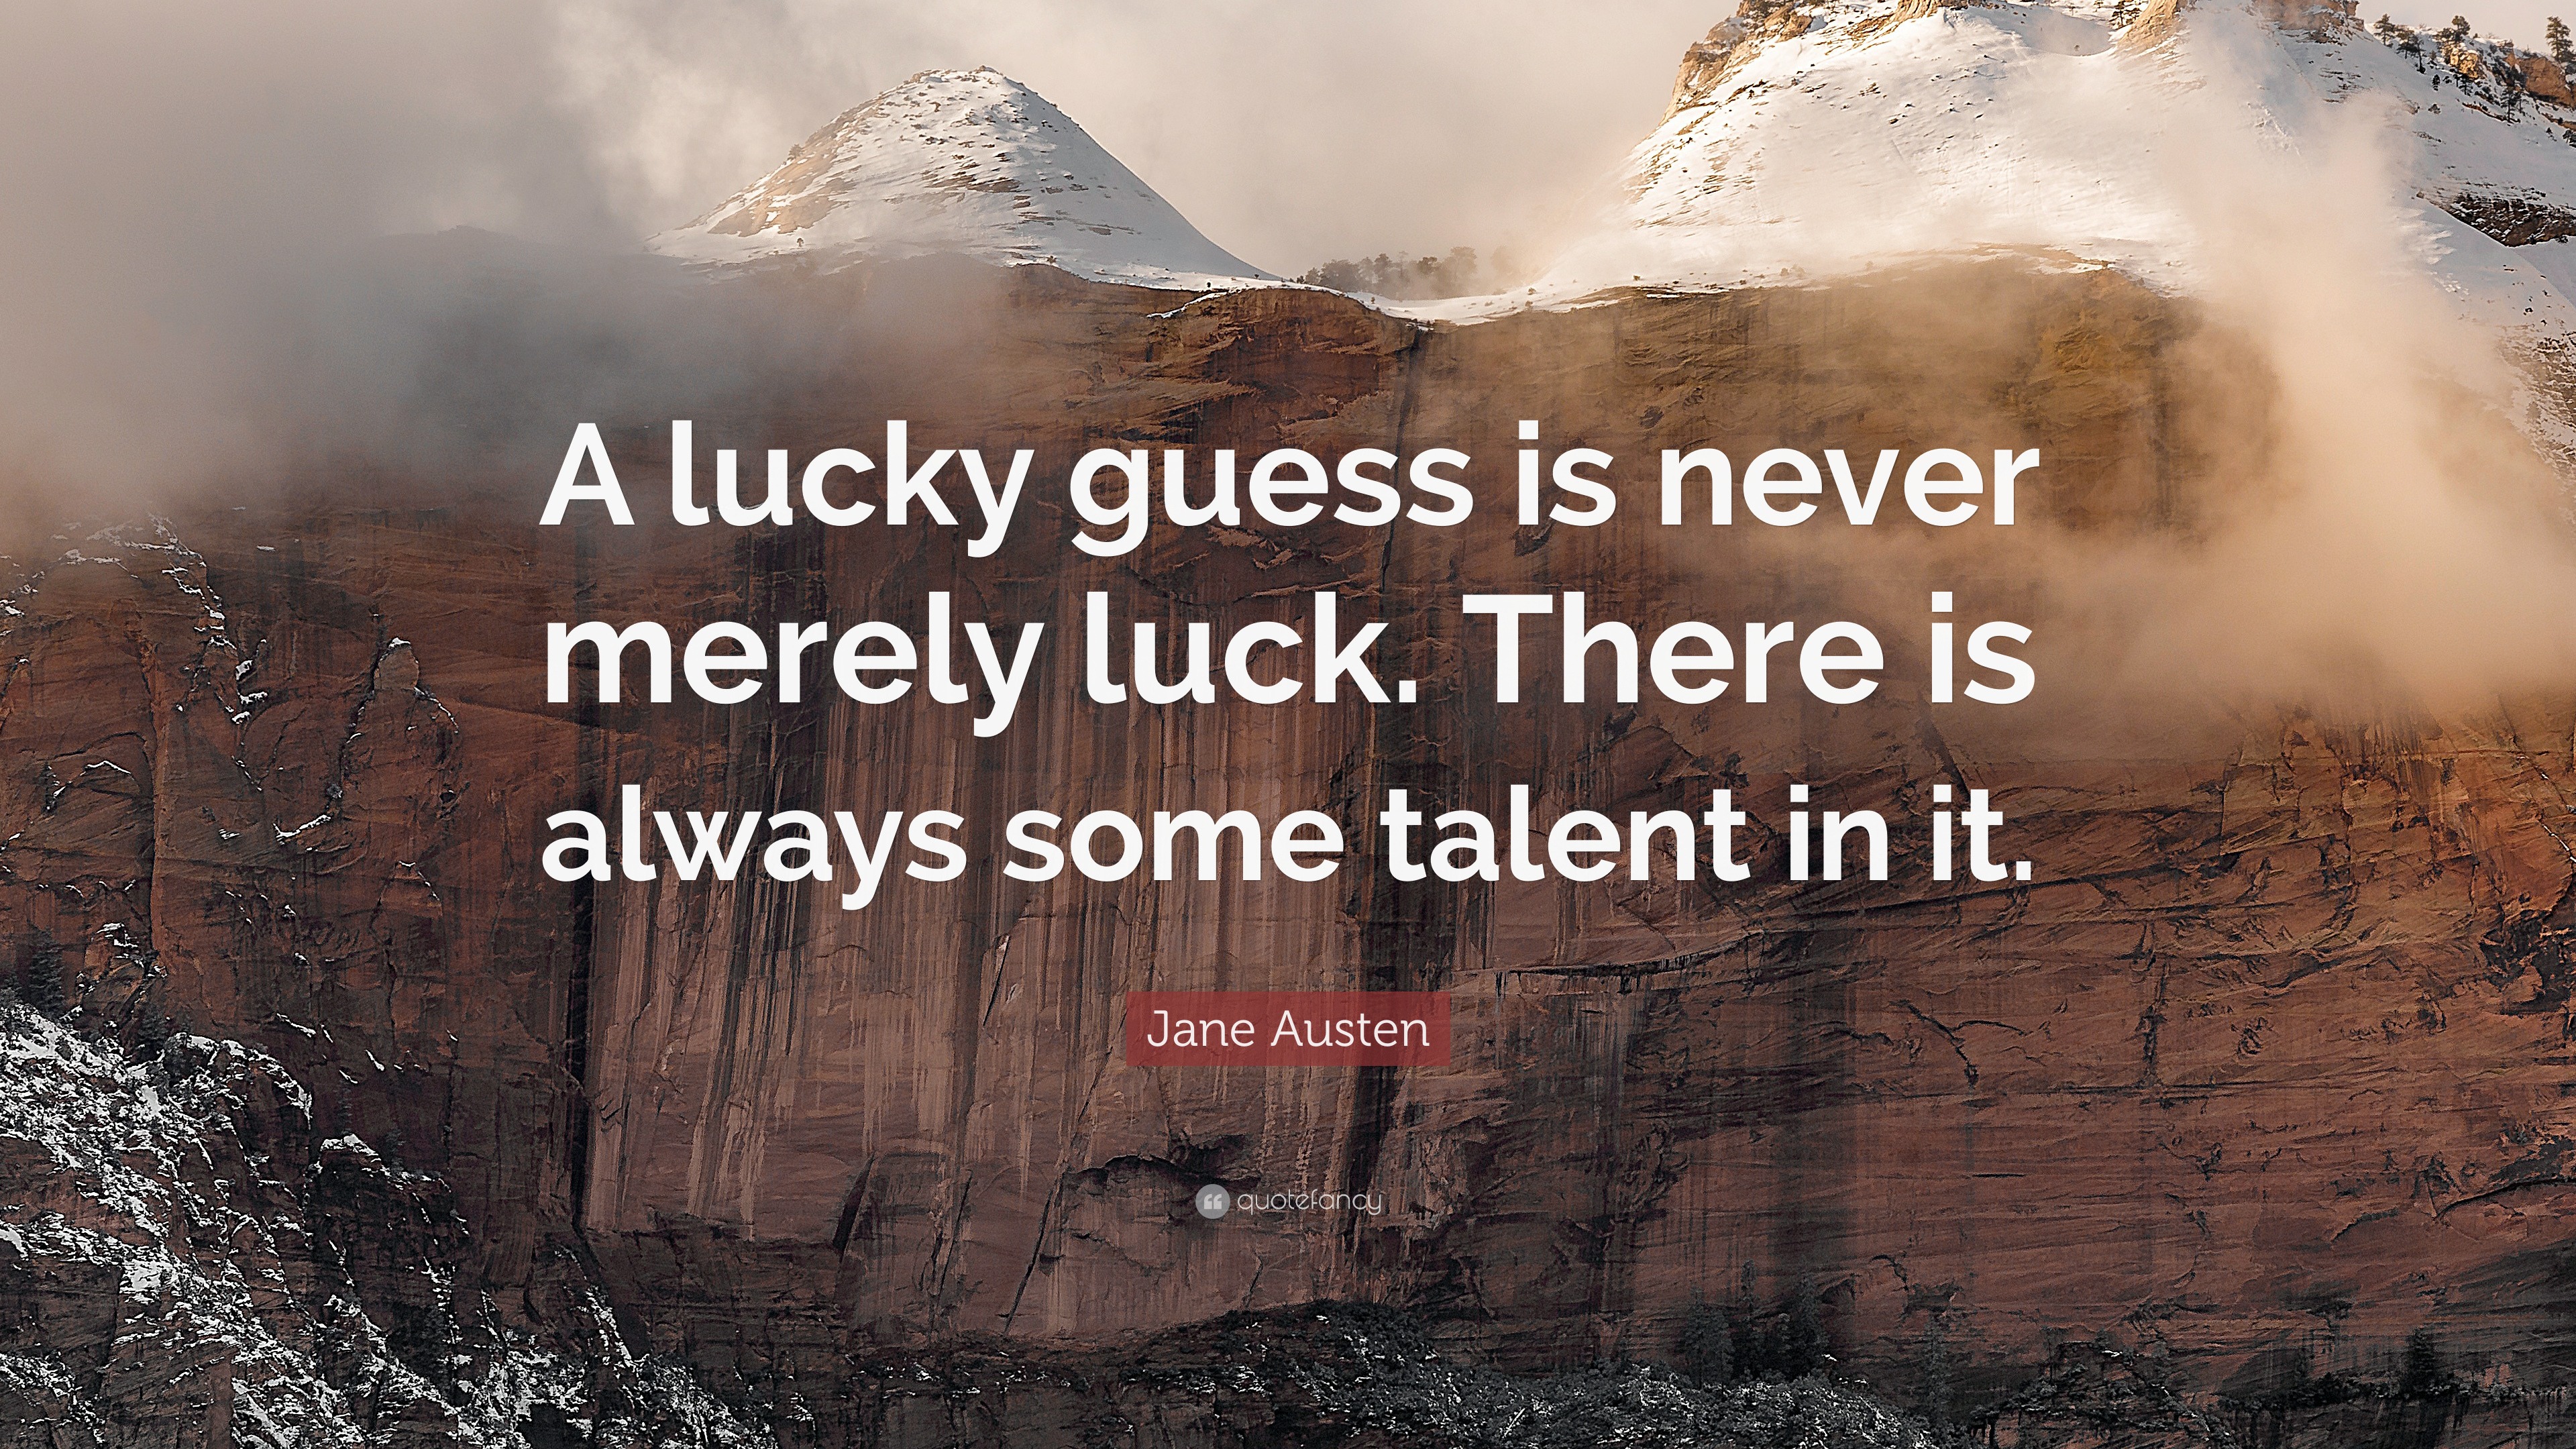 Jane Austen Quote: lucky guess never merely luck. There is always some talent in